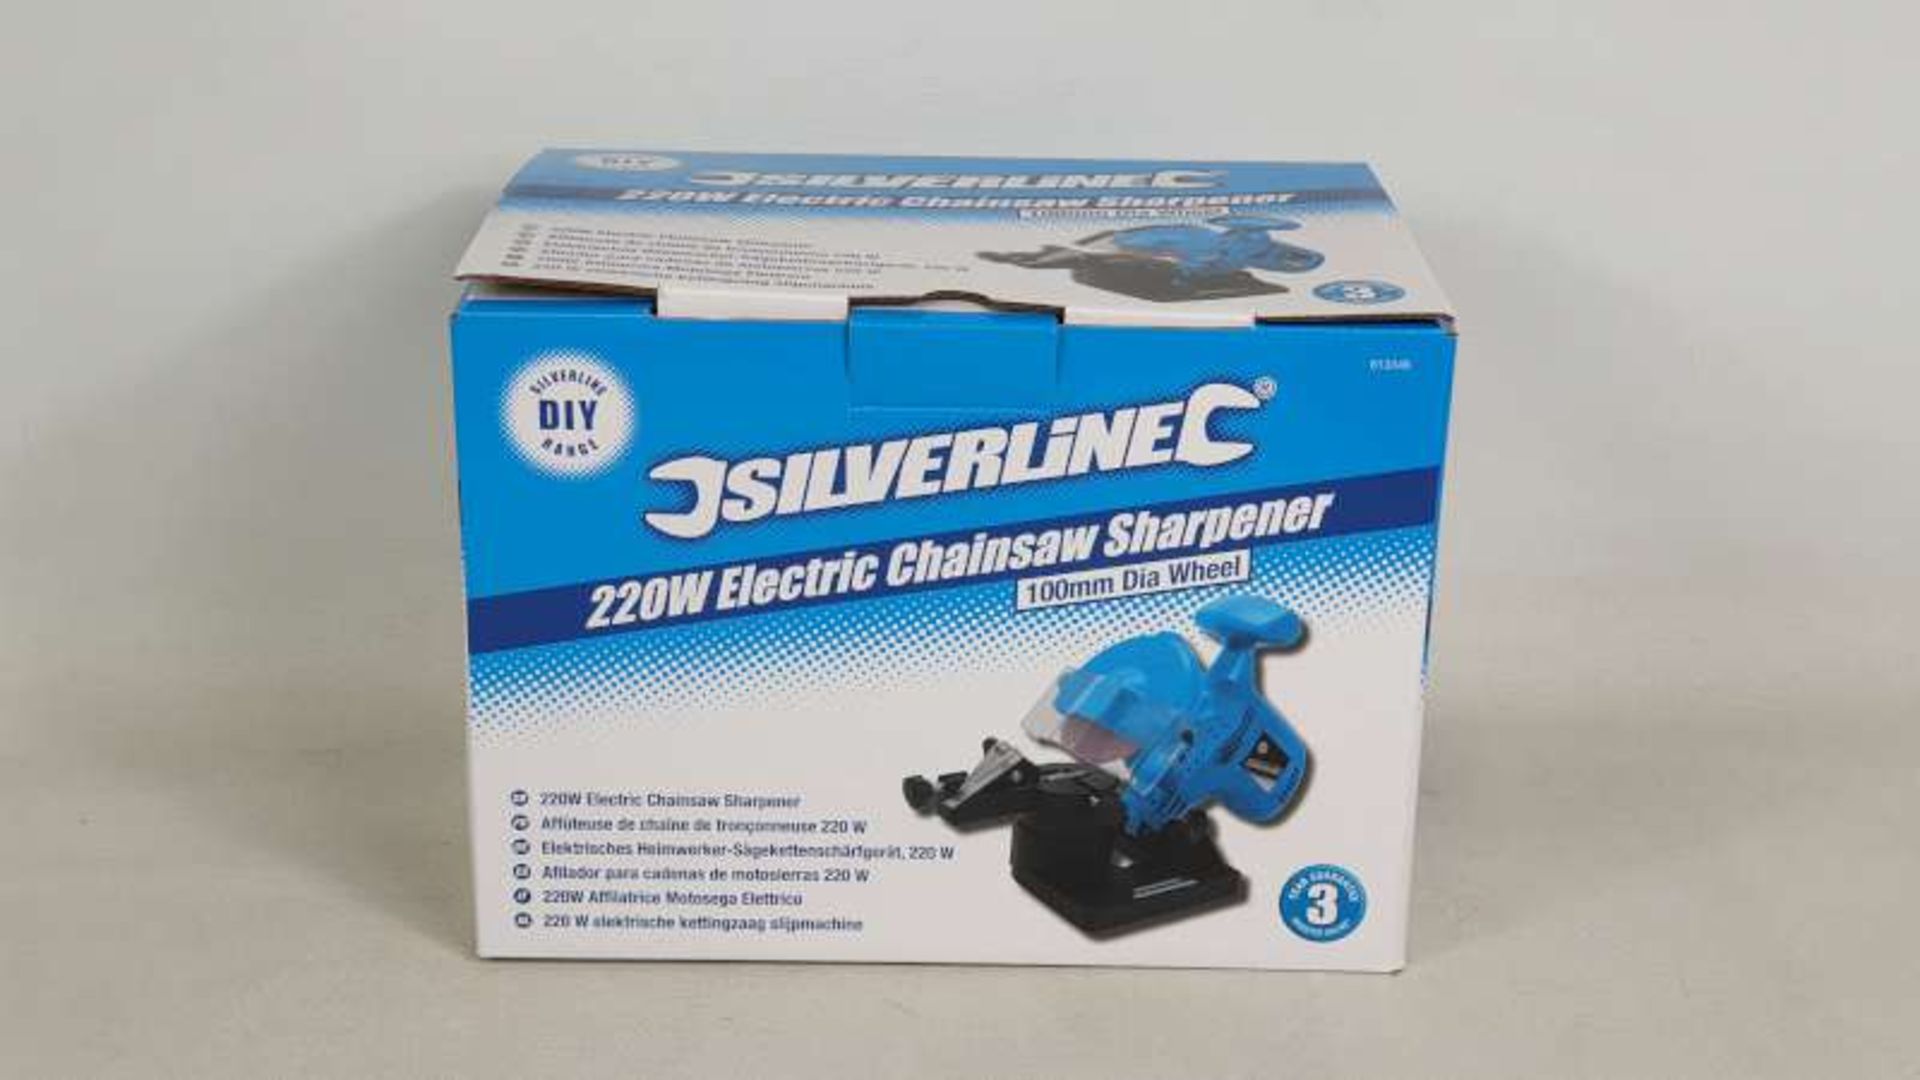 6 X BRAND NEW BOXED 220W ELECTRIC CHAINSAW SHARPENERS WITH 100MM DIAL WHEEL AND 3 YEAR MANUFACTURERS